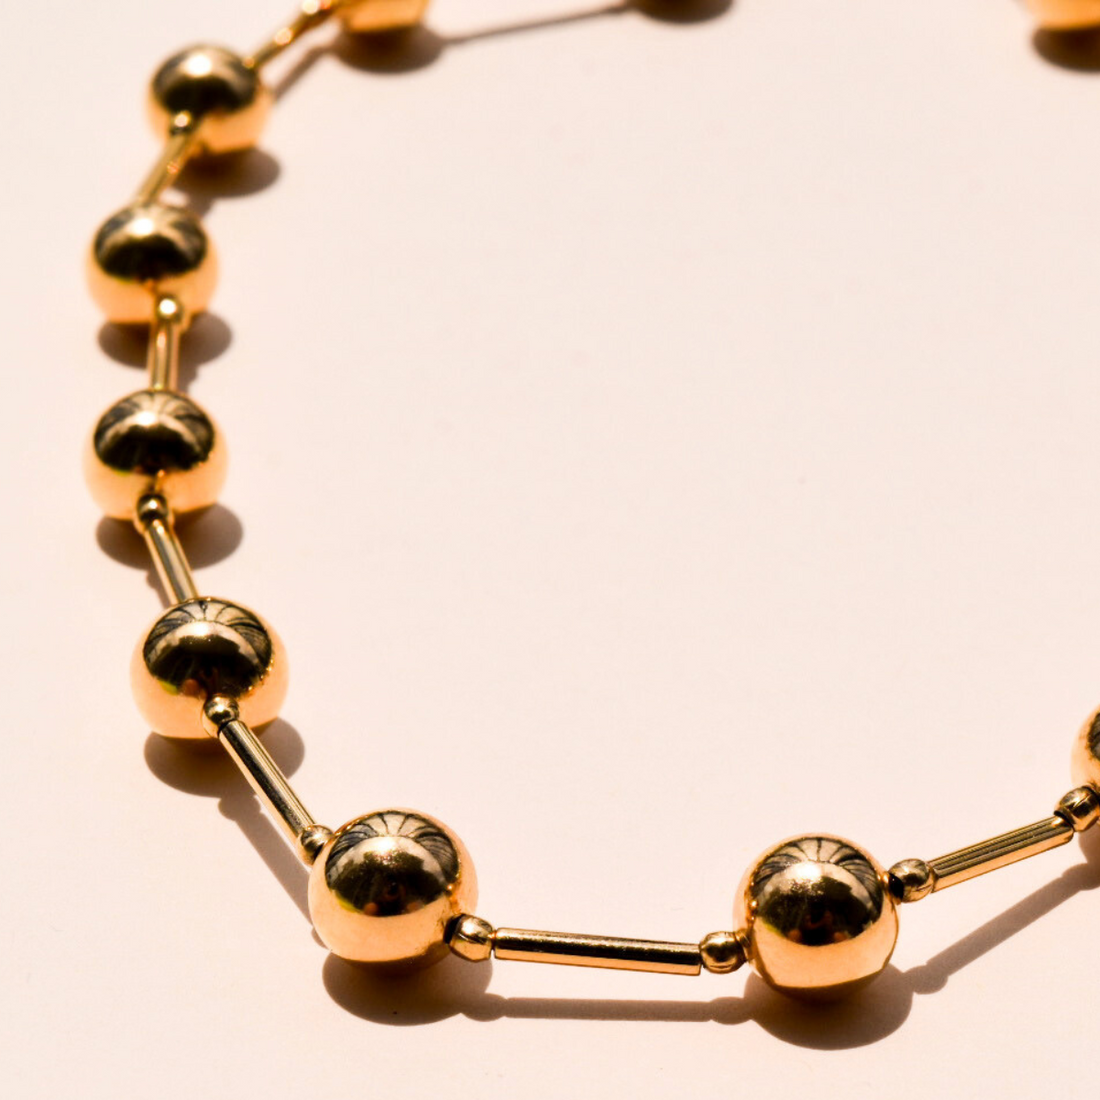 Golden Ball Choker Shop Jewelry at MCHARMS